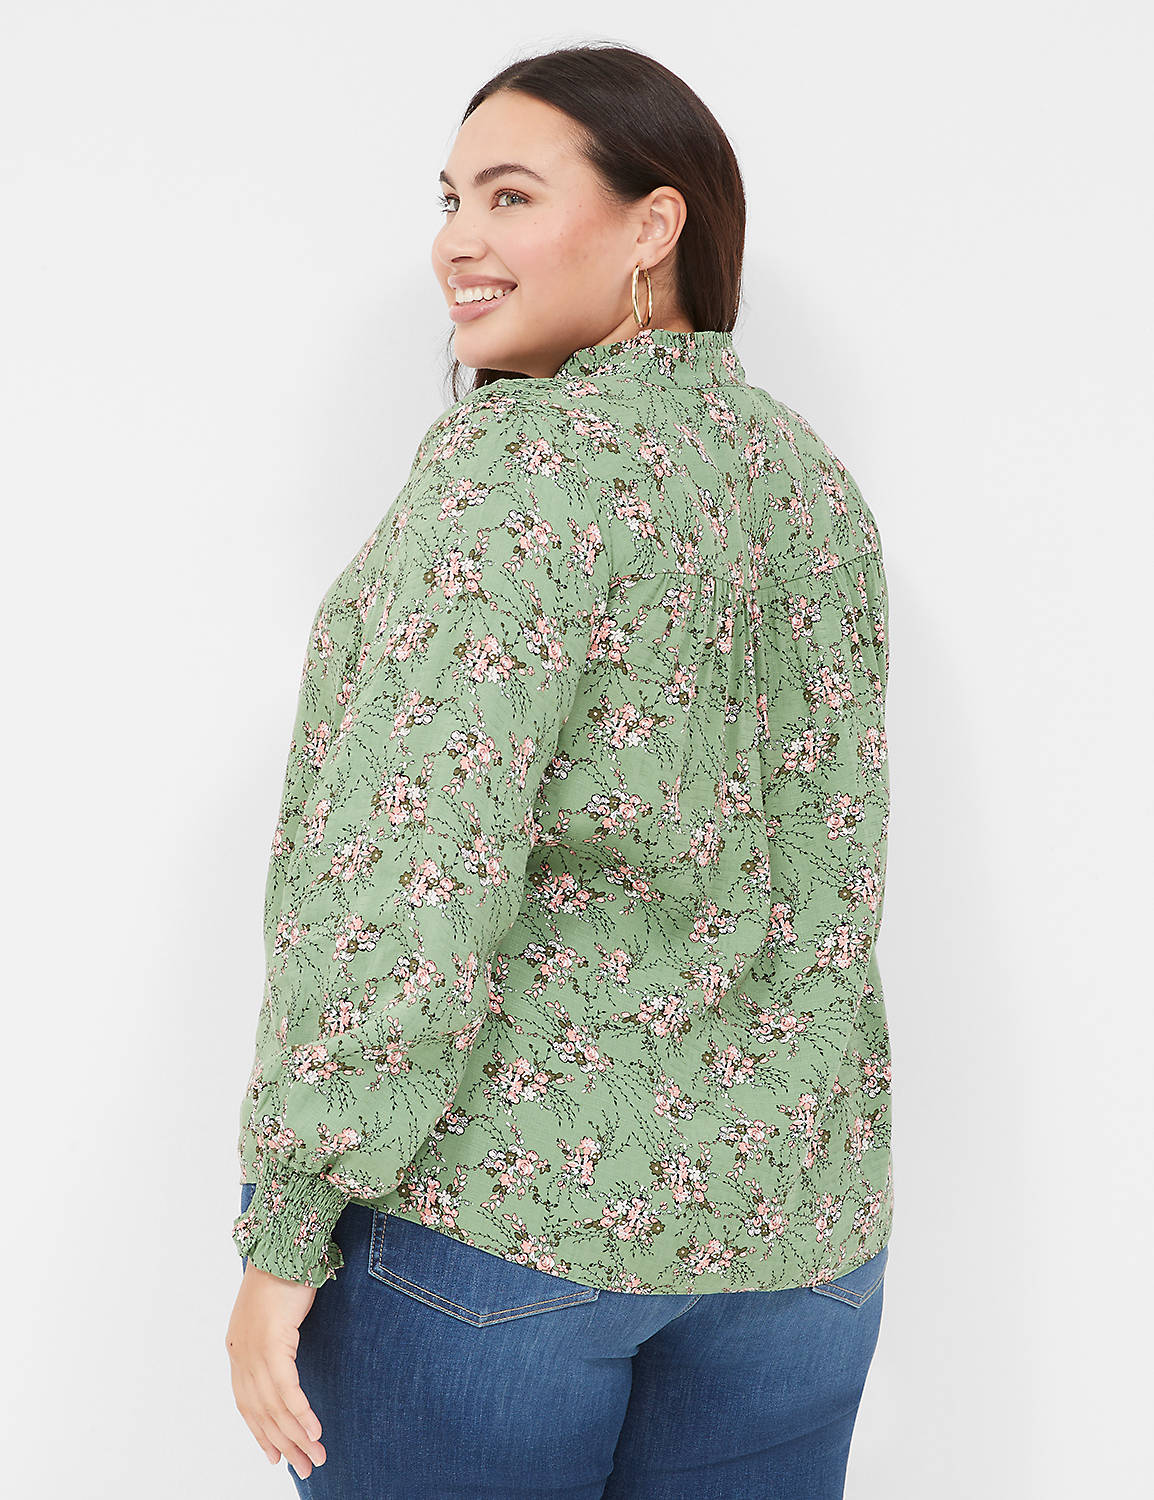 Long Sleeve Popover with Smocked Sh Product Image 2